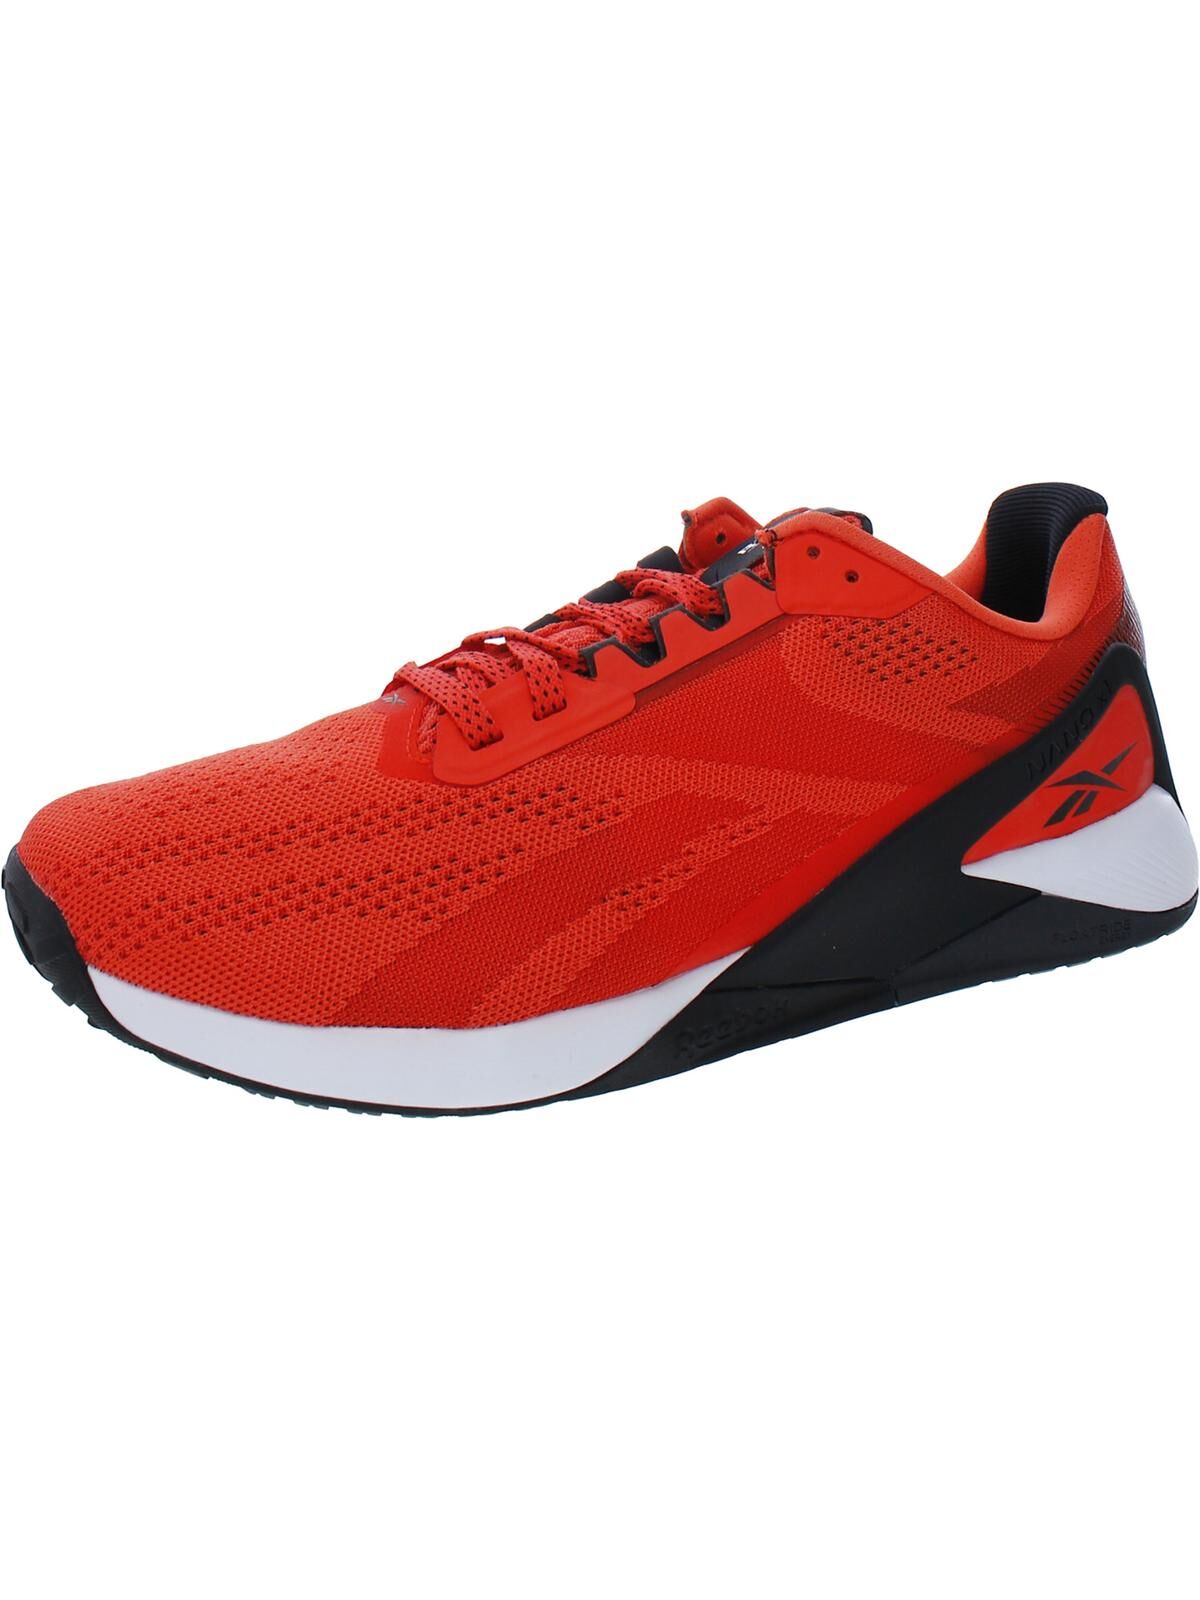 Reebok Nano X1 Mens Fitness Running Athletic and Training Shoes US 12.5 male